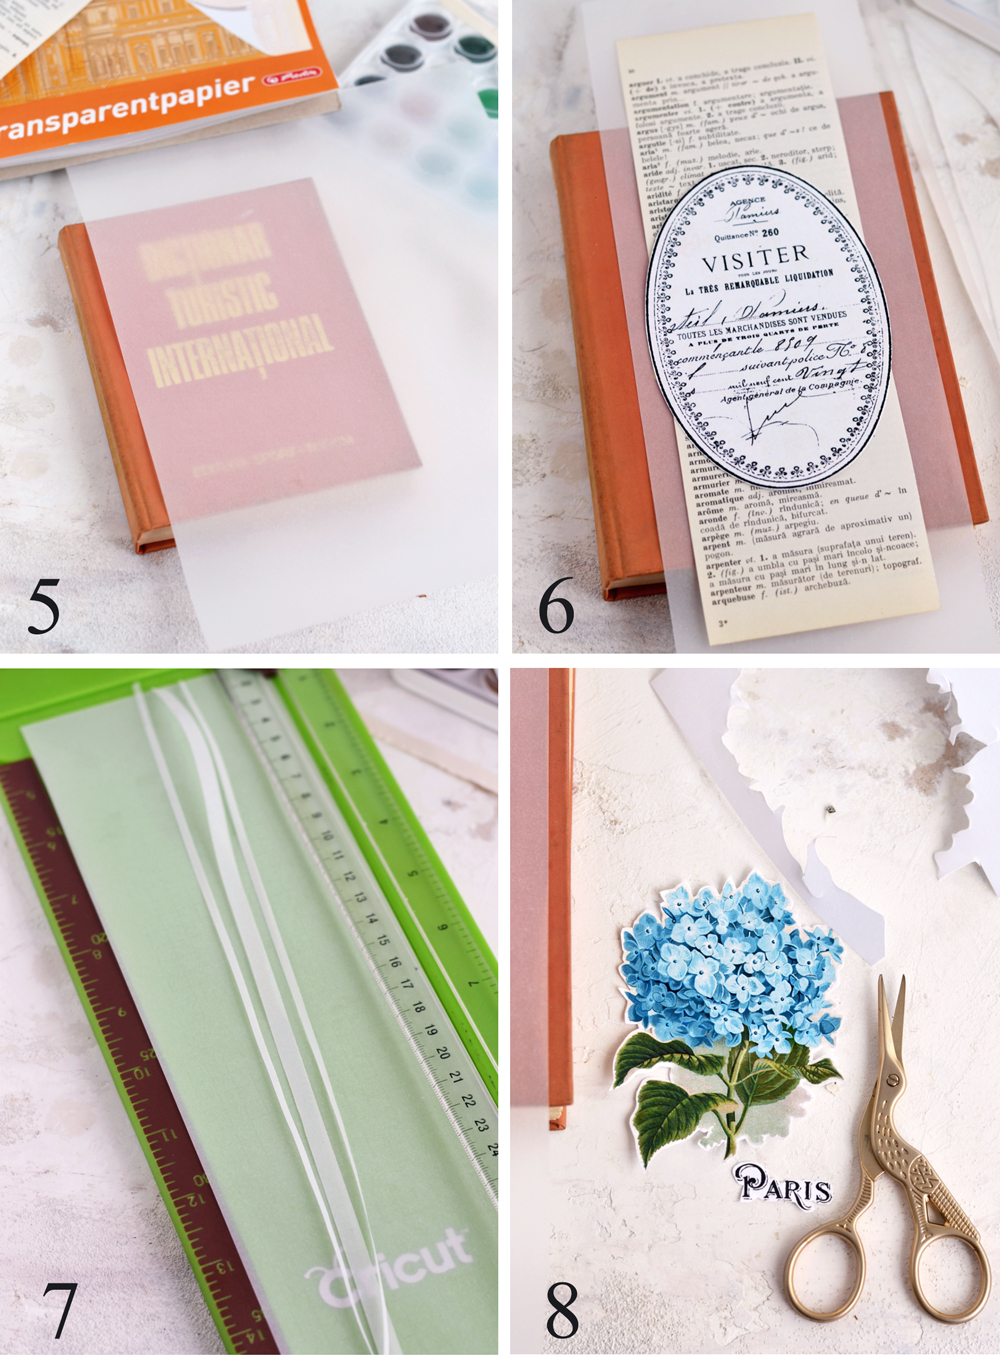 Hydrangeas with french labels book cover cutting out